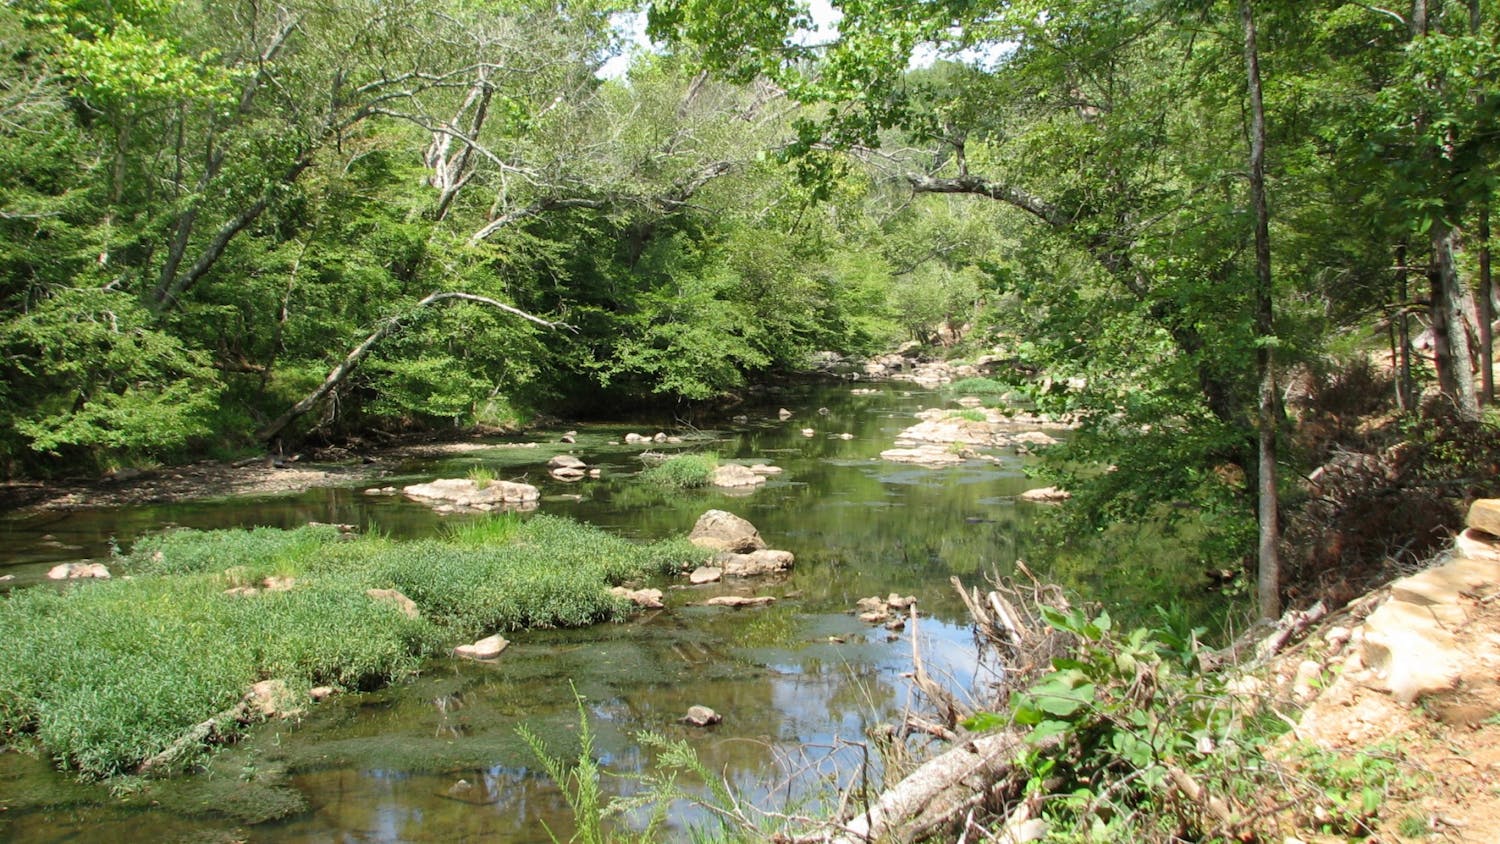 The Eno River State Park in Durham features 30 miles of hiking trails and a shallow, winding stream.